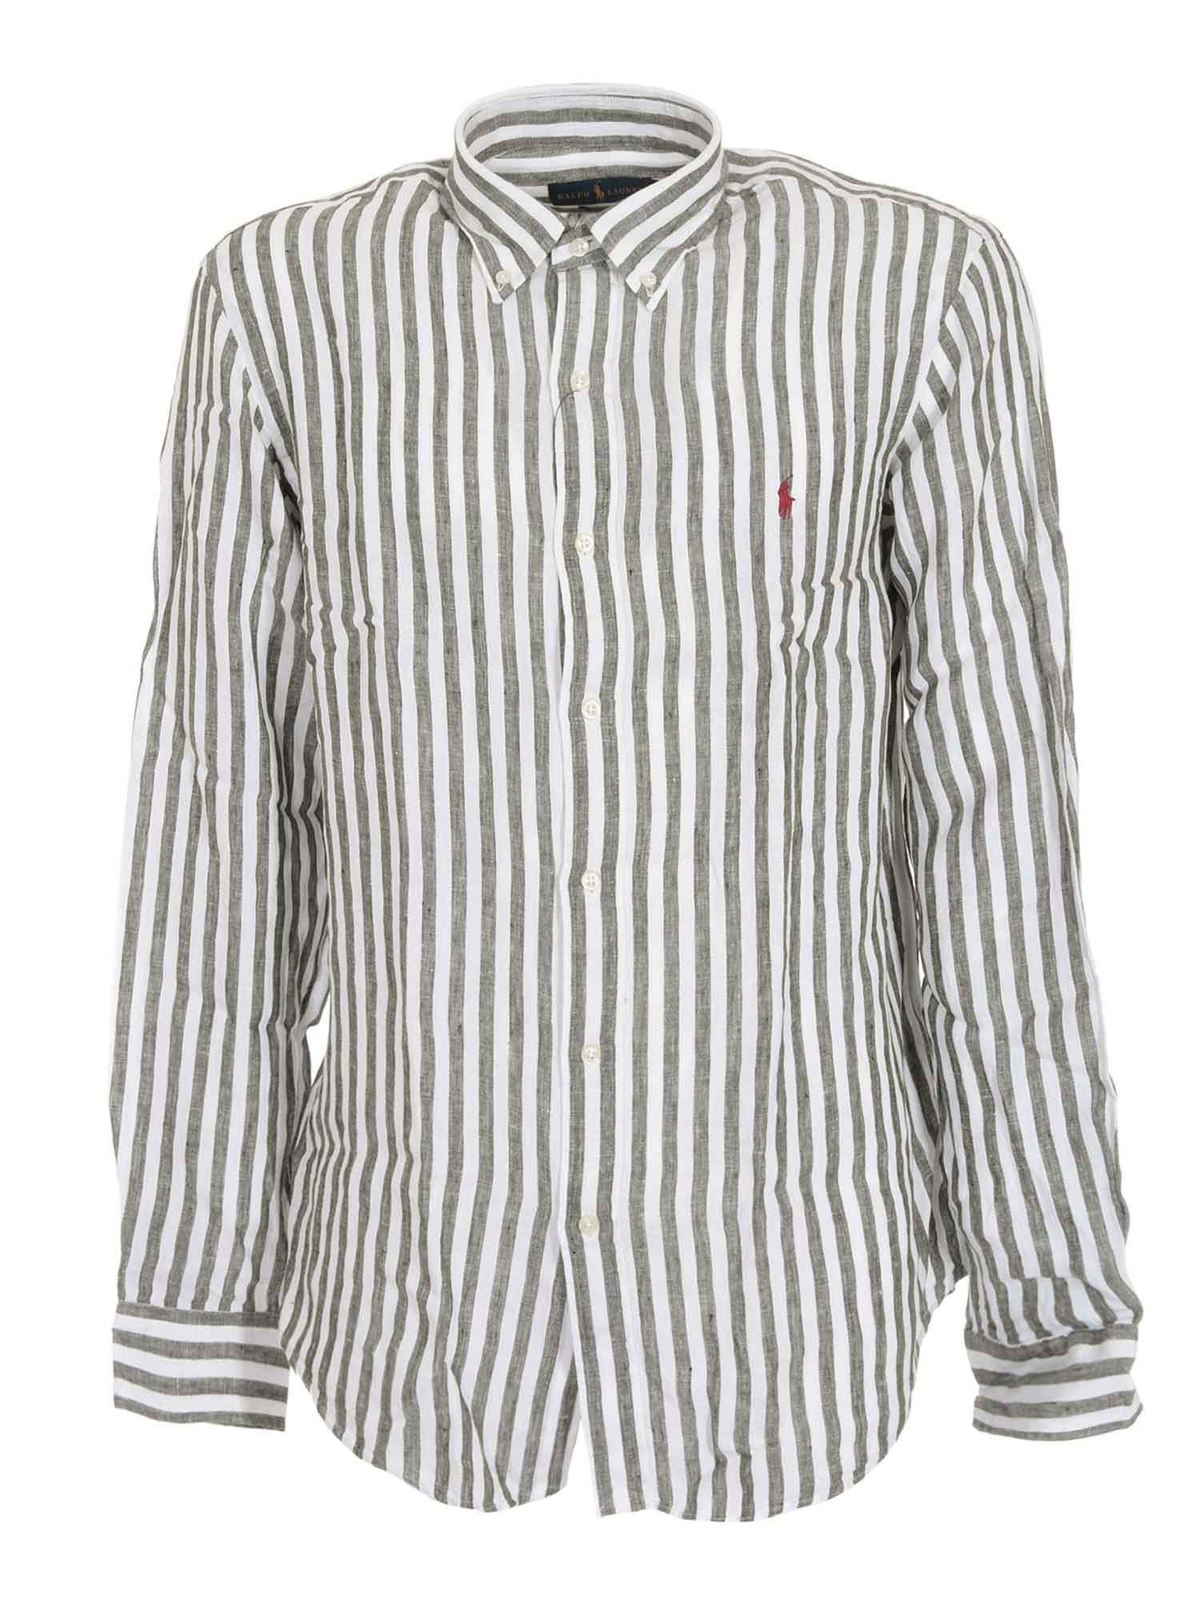 Polo Ralph Lauren Classic Striped Shirt In White And Green